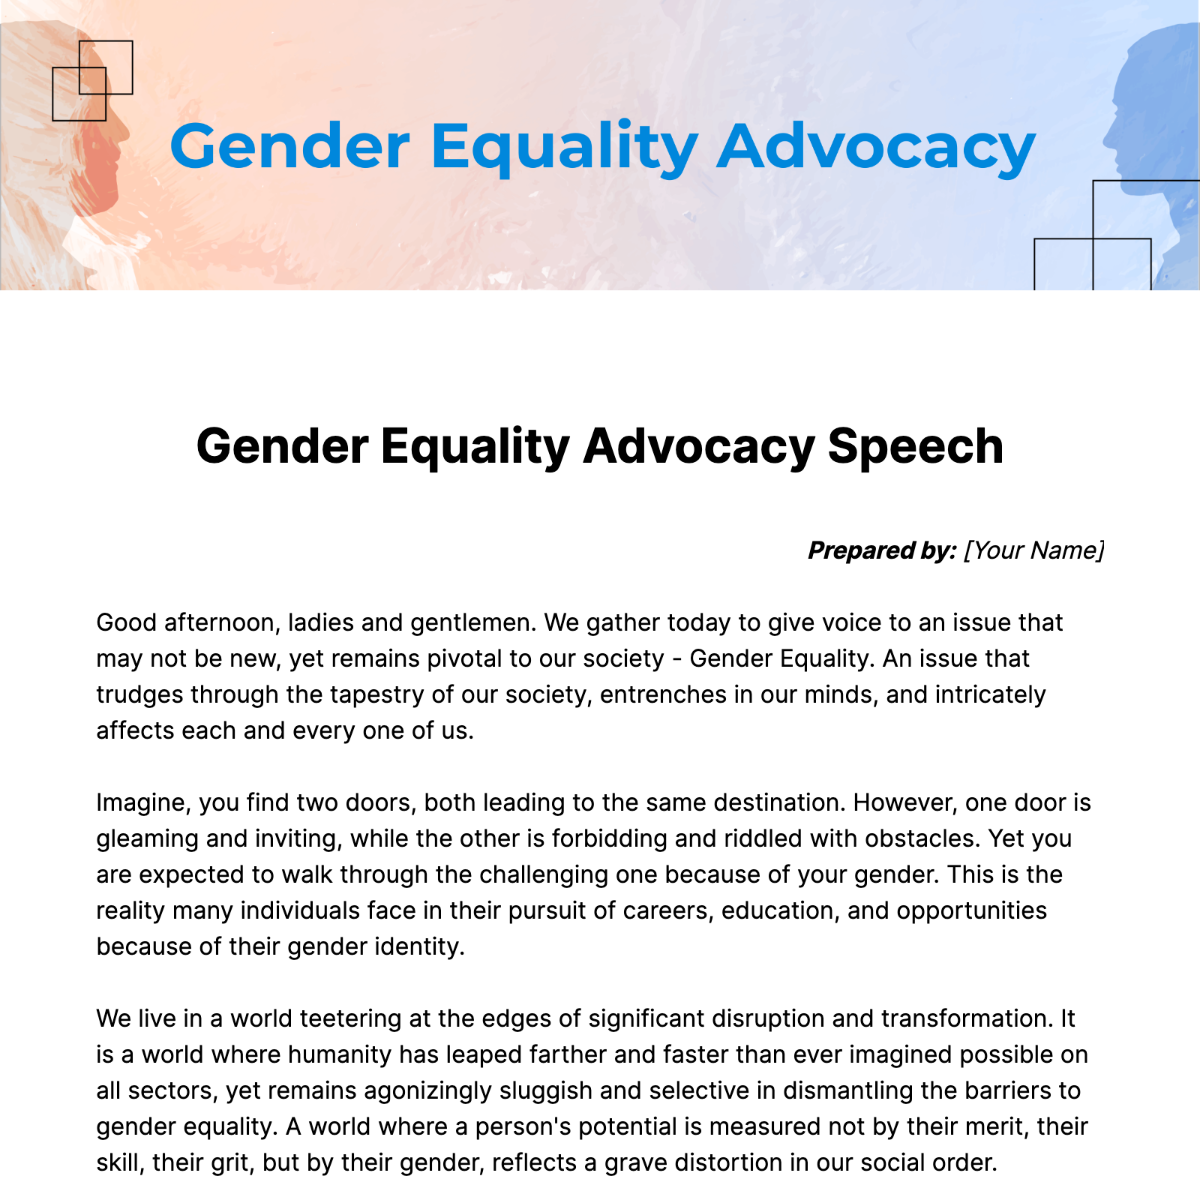 Gender Equality Advocacy Speech Template